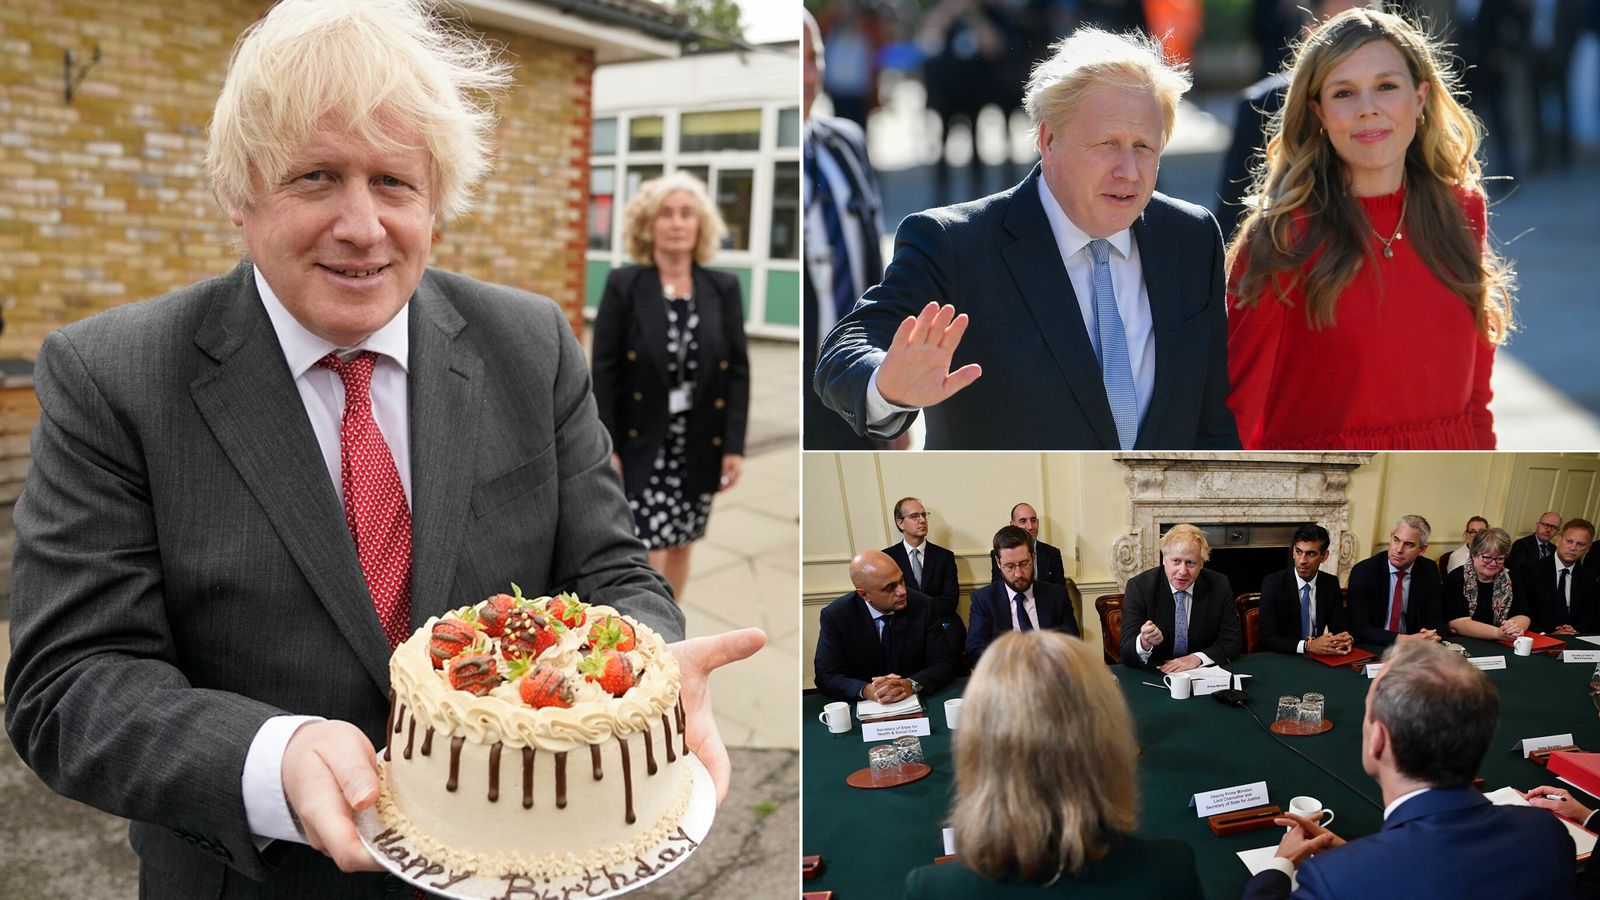 Downing Street parties: Boris Johnson's birthday celebration involved people who were already working together - minister